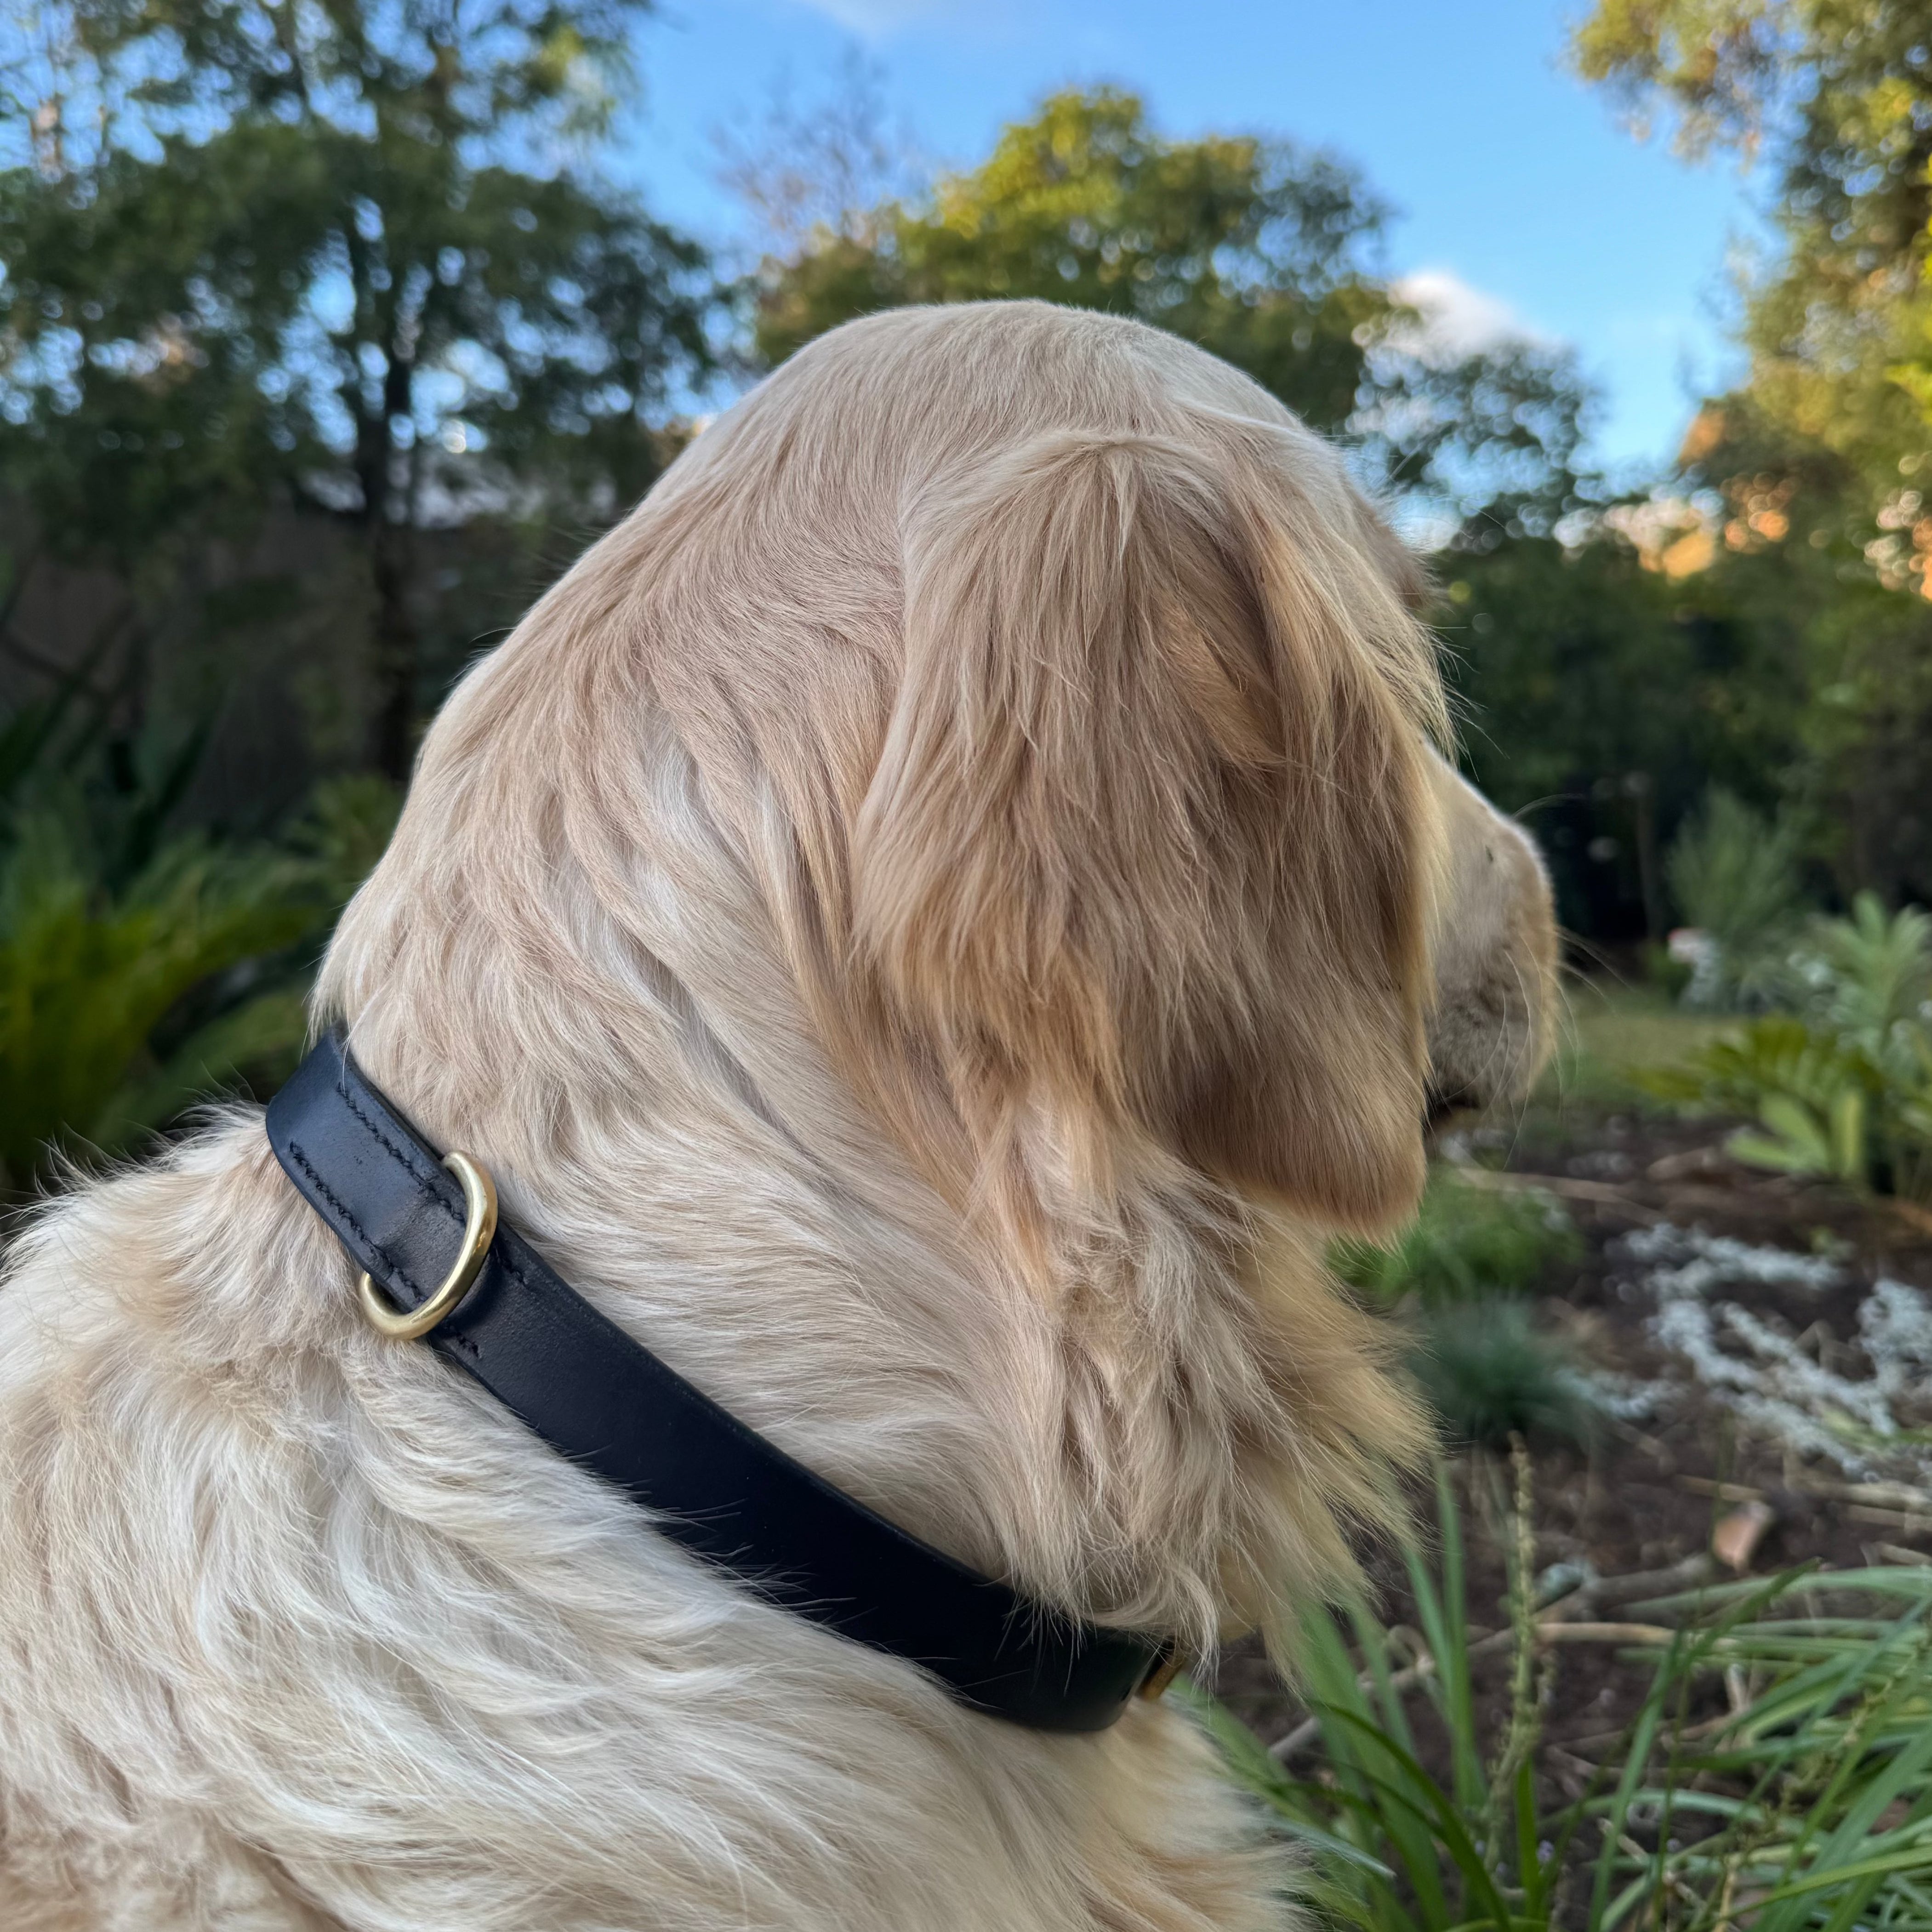 A golden retriever with a handmade Georgie Paws Bald Collar Navy is sitting and looking away toward a garden with various green plants and trees. The sky is partly cloudy, and the sunlight casts a warm glow on the dog's fur. The scene evokes a calm and peaceful outdoor environment.